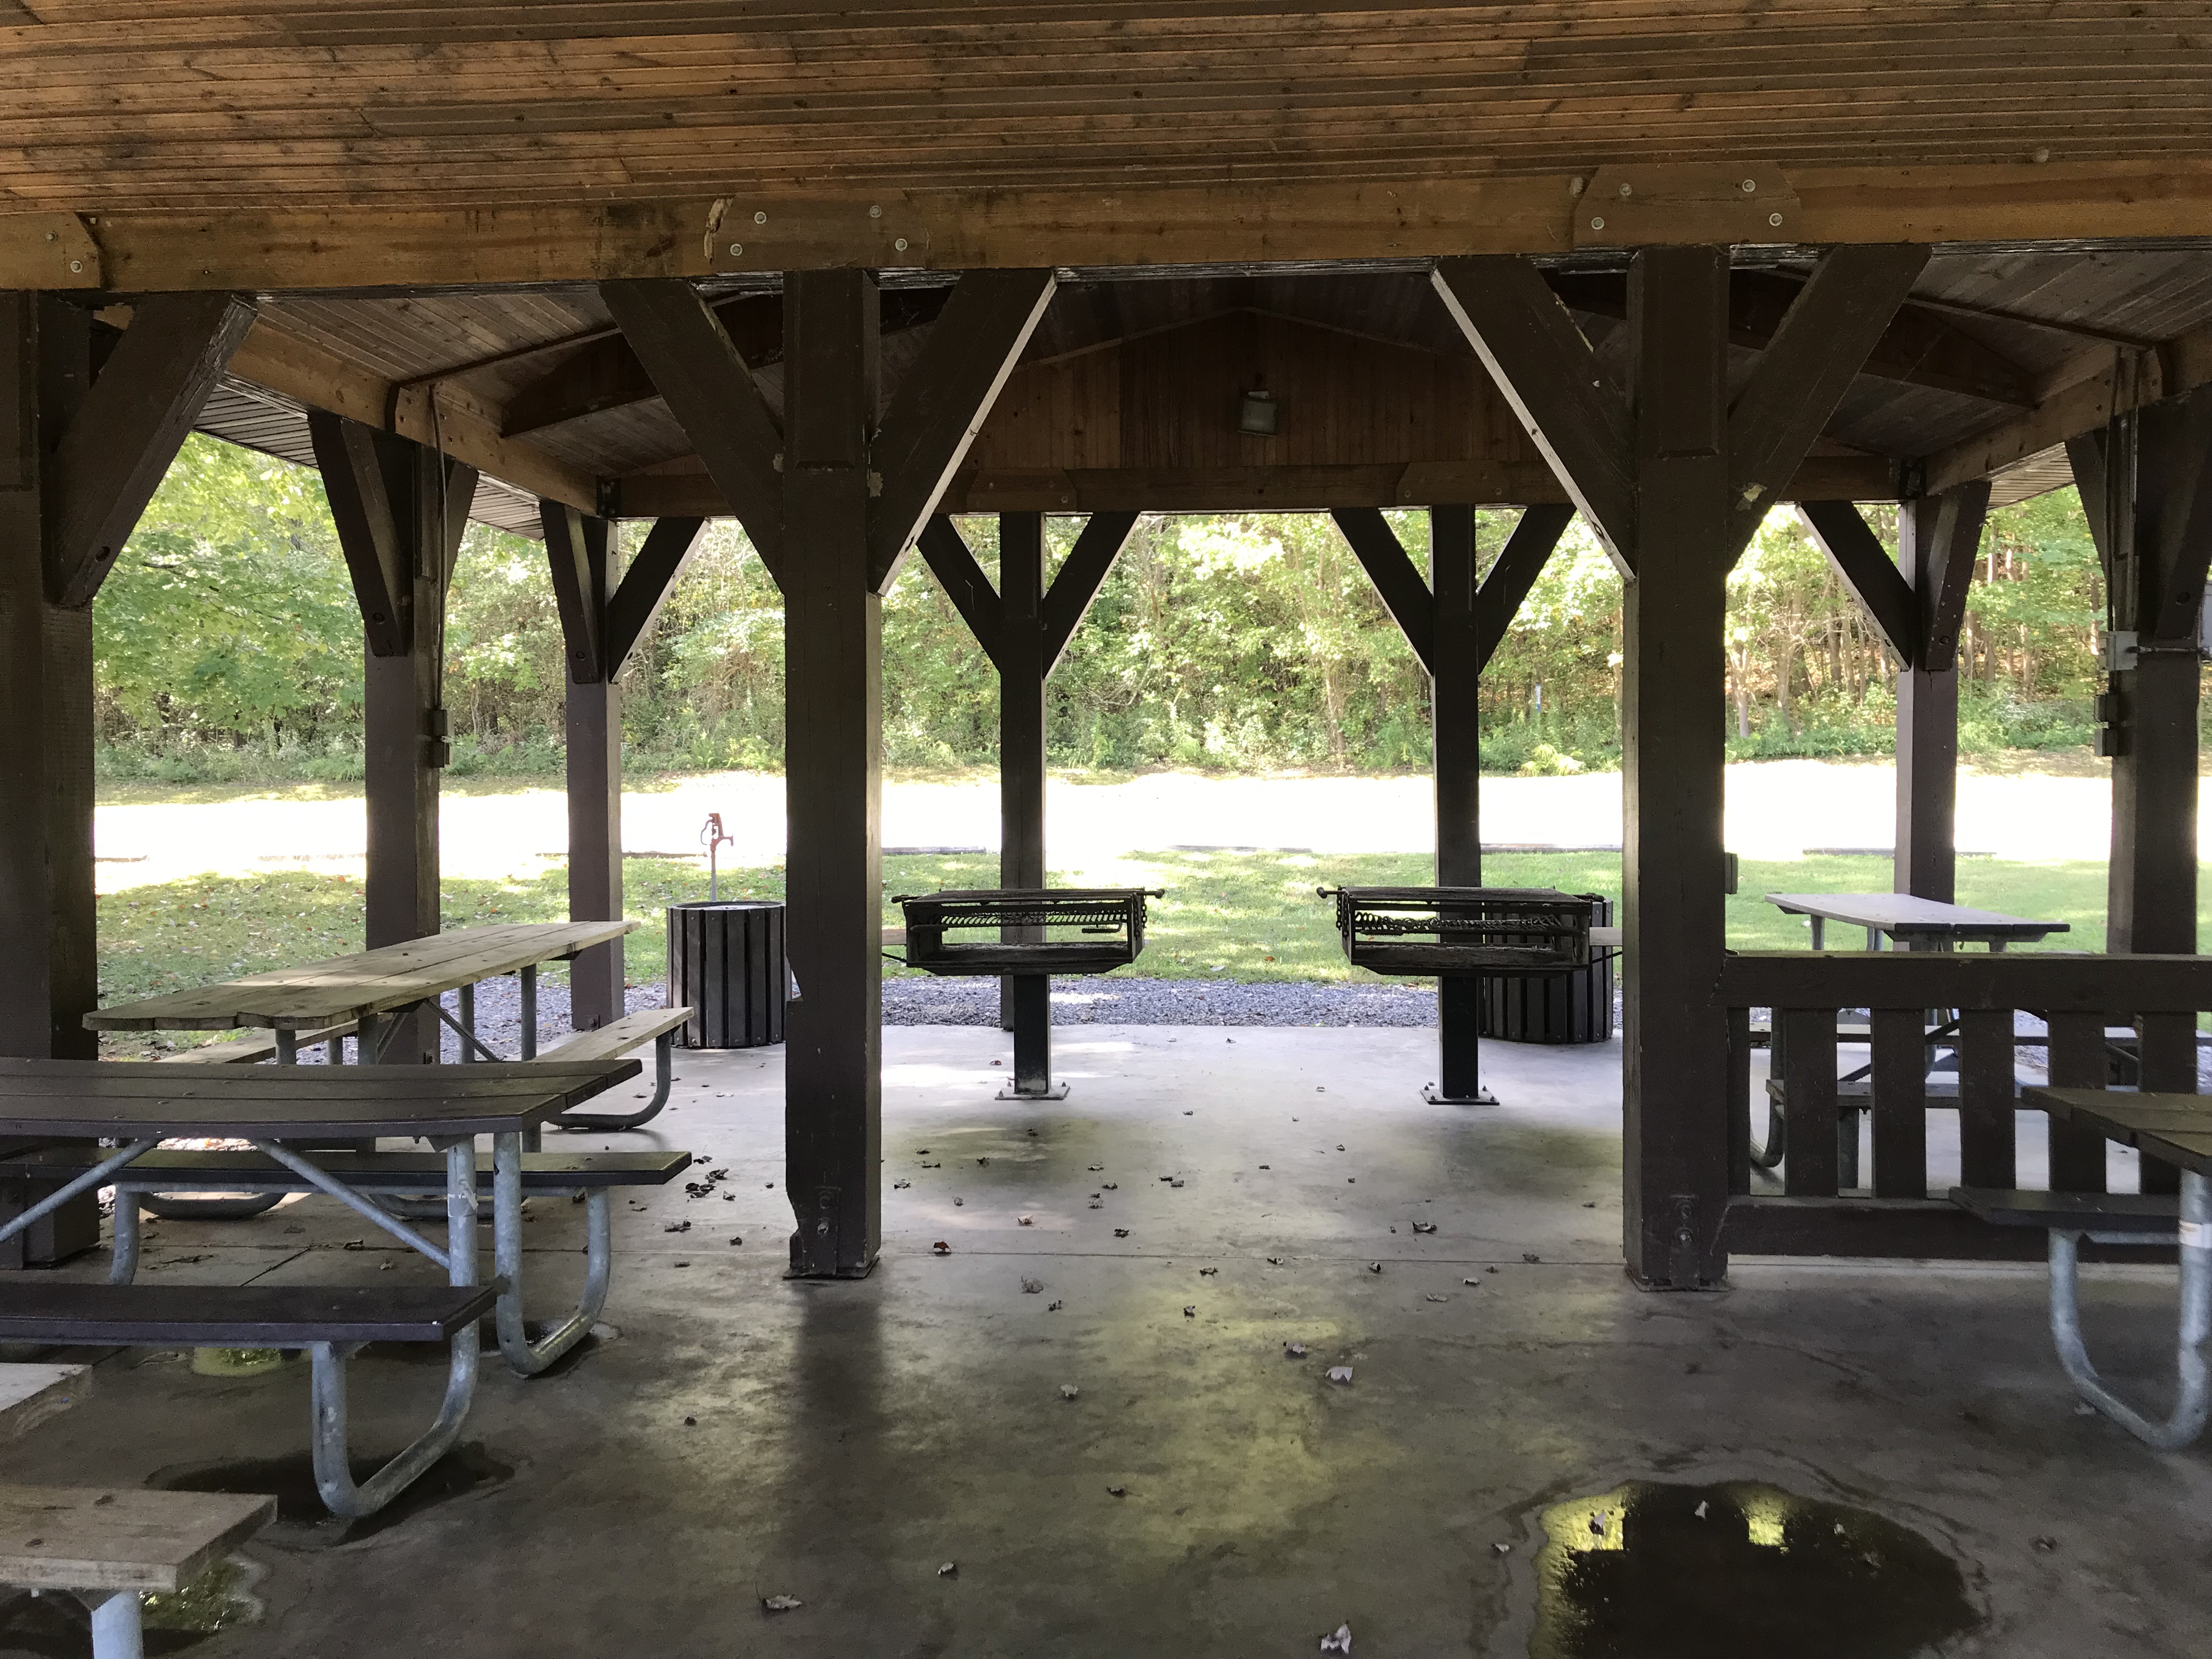 Picnic tables and grills under the roof of the shelter